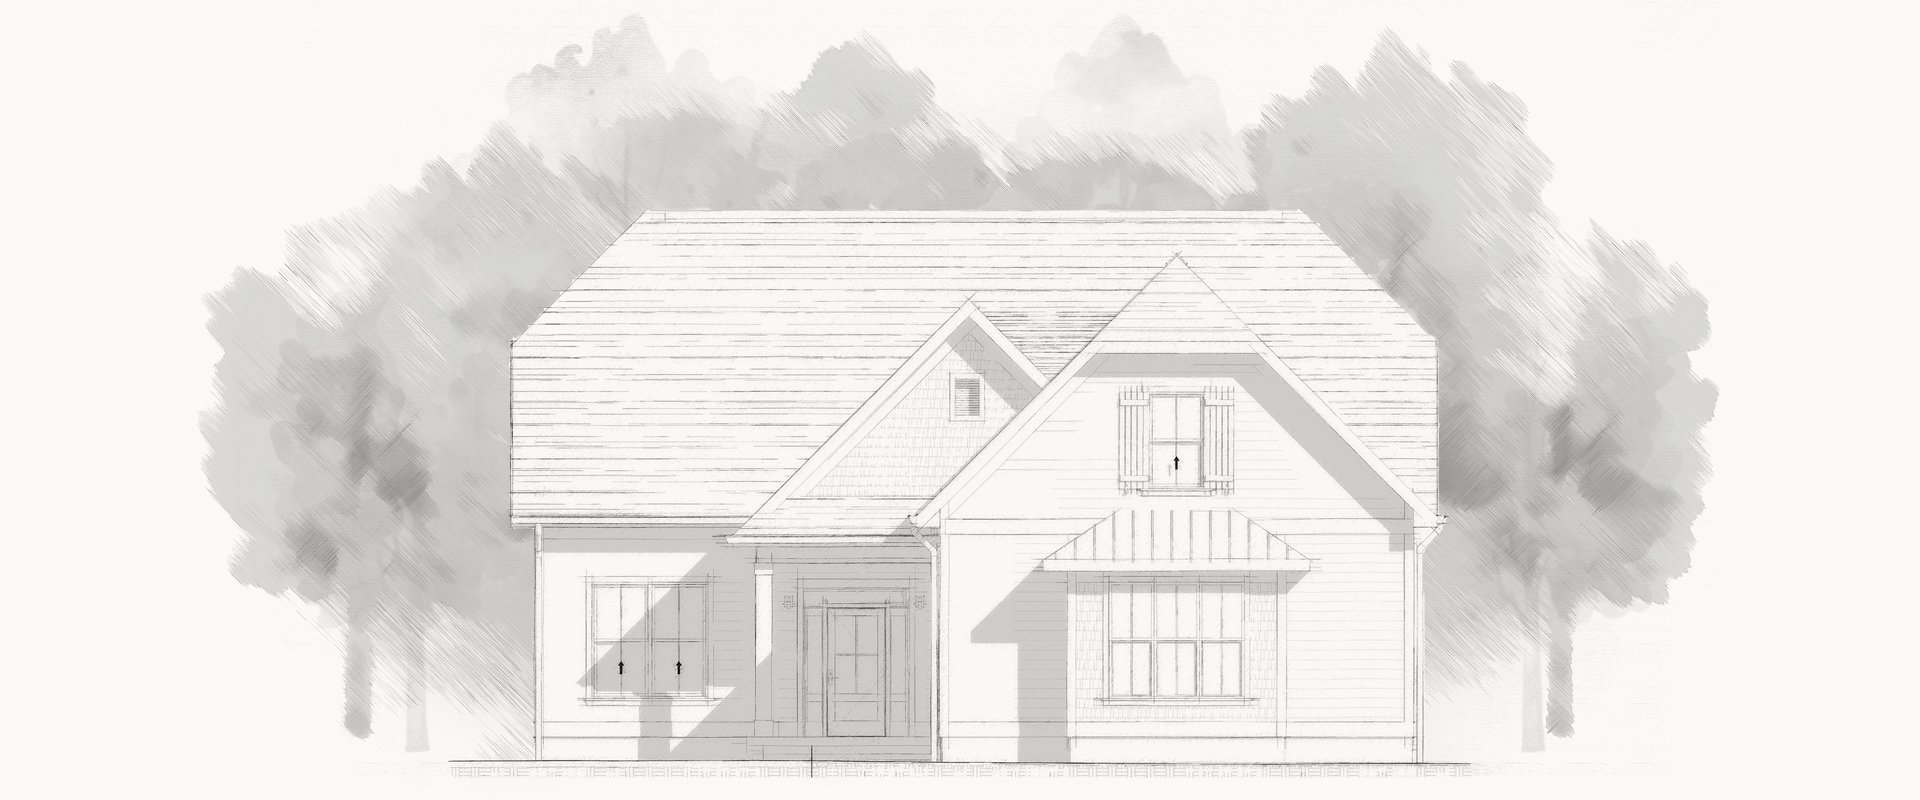 Blythe Custom Homes' Glenhaven model features 3 BR, 2.5 BA and 2,655 finished sf